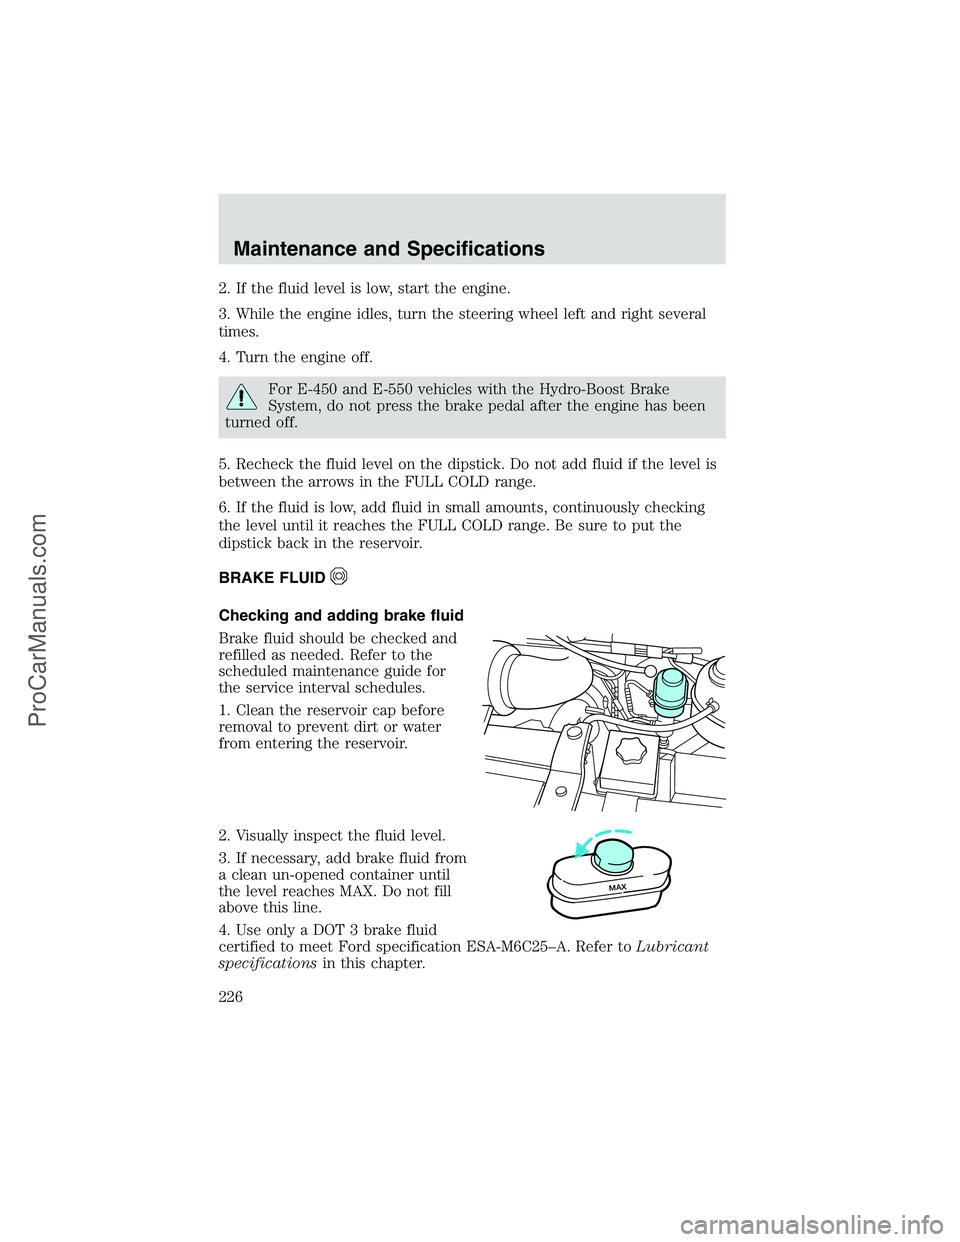 FORD E-350 2002 Service Manual 2. If the fluid level is low, start the engine.
3. While the engine idles, turn the steering wheel left and right several
times.
4. Turn the engine off.
For E-450 and E-550 vehicles with the Hydro-Boo